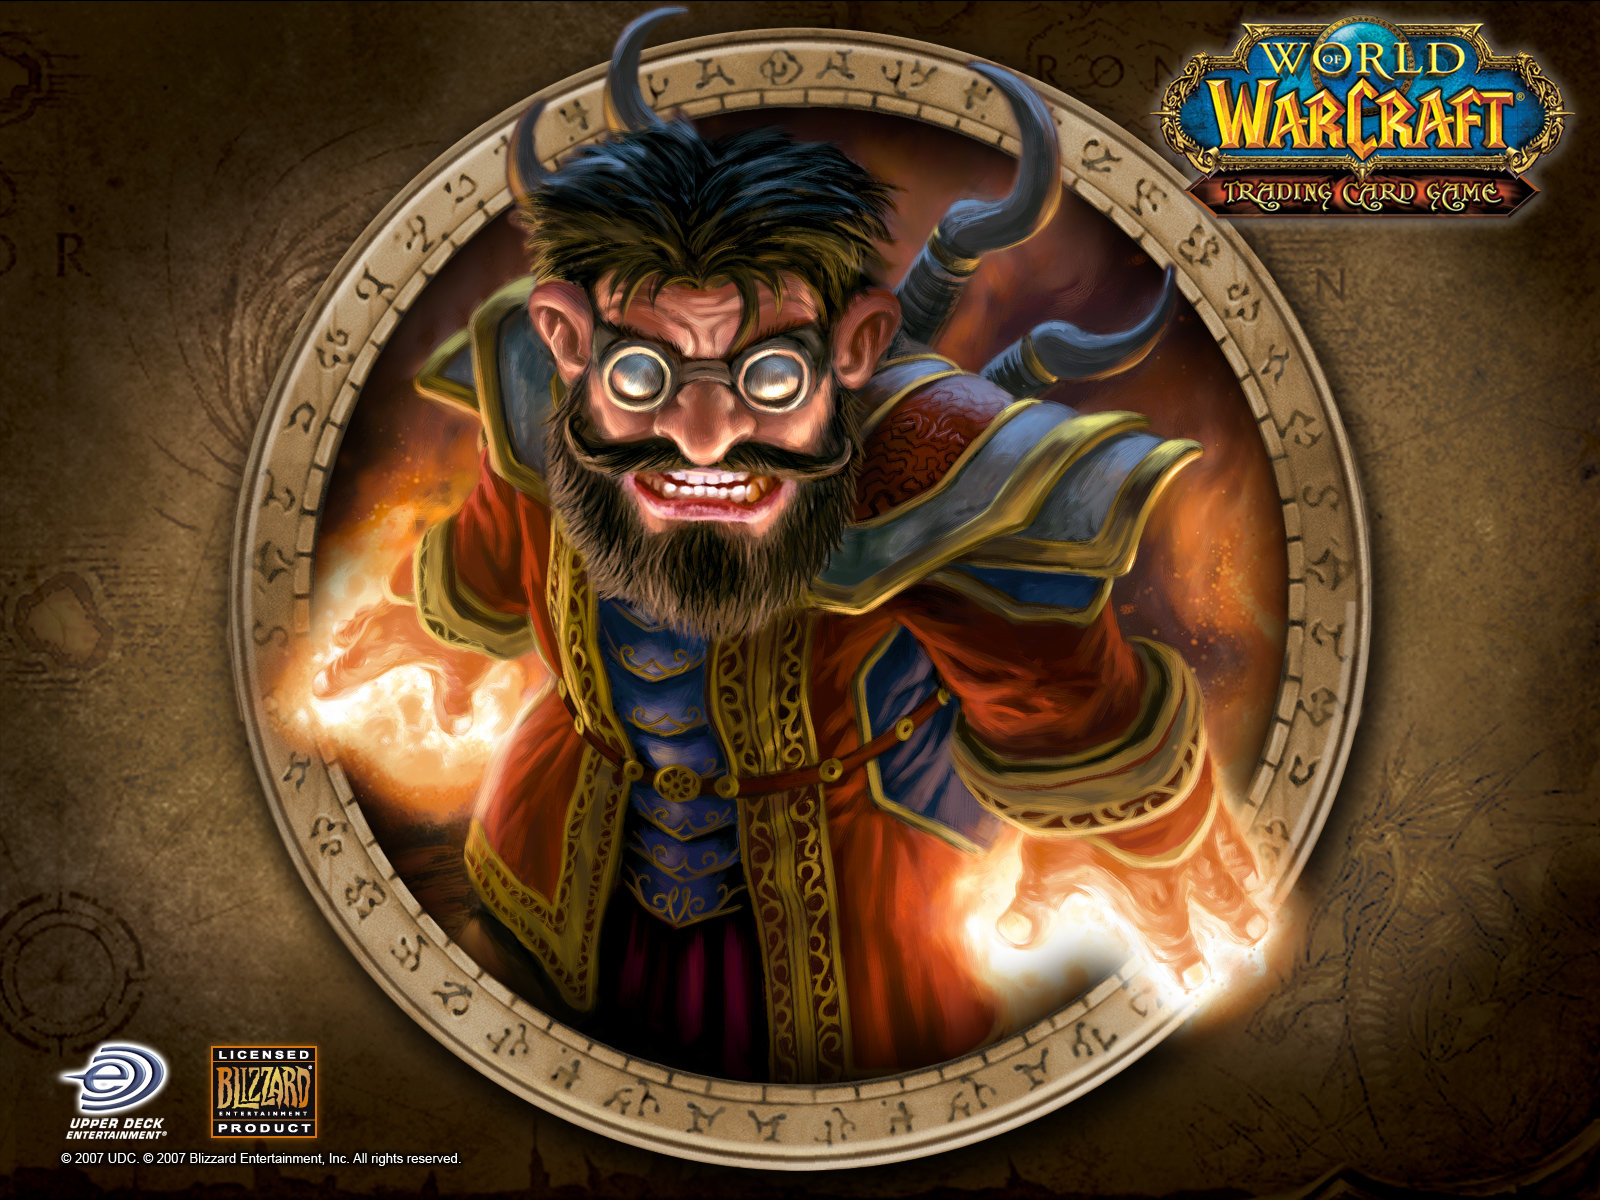 General 1600x1200 GNOME WOW 3 World of Warcraft: Trading Card Game beard Blizzard Entertainment Trading Card Games video games